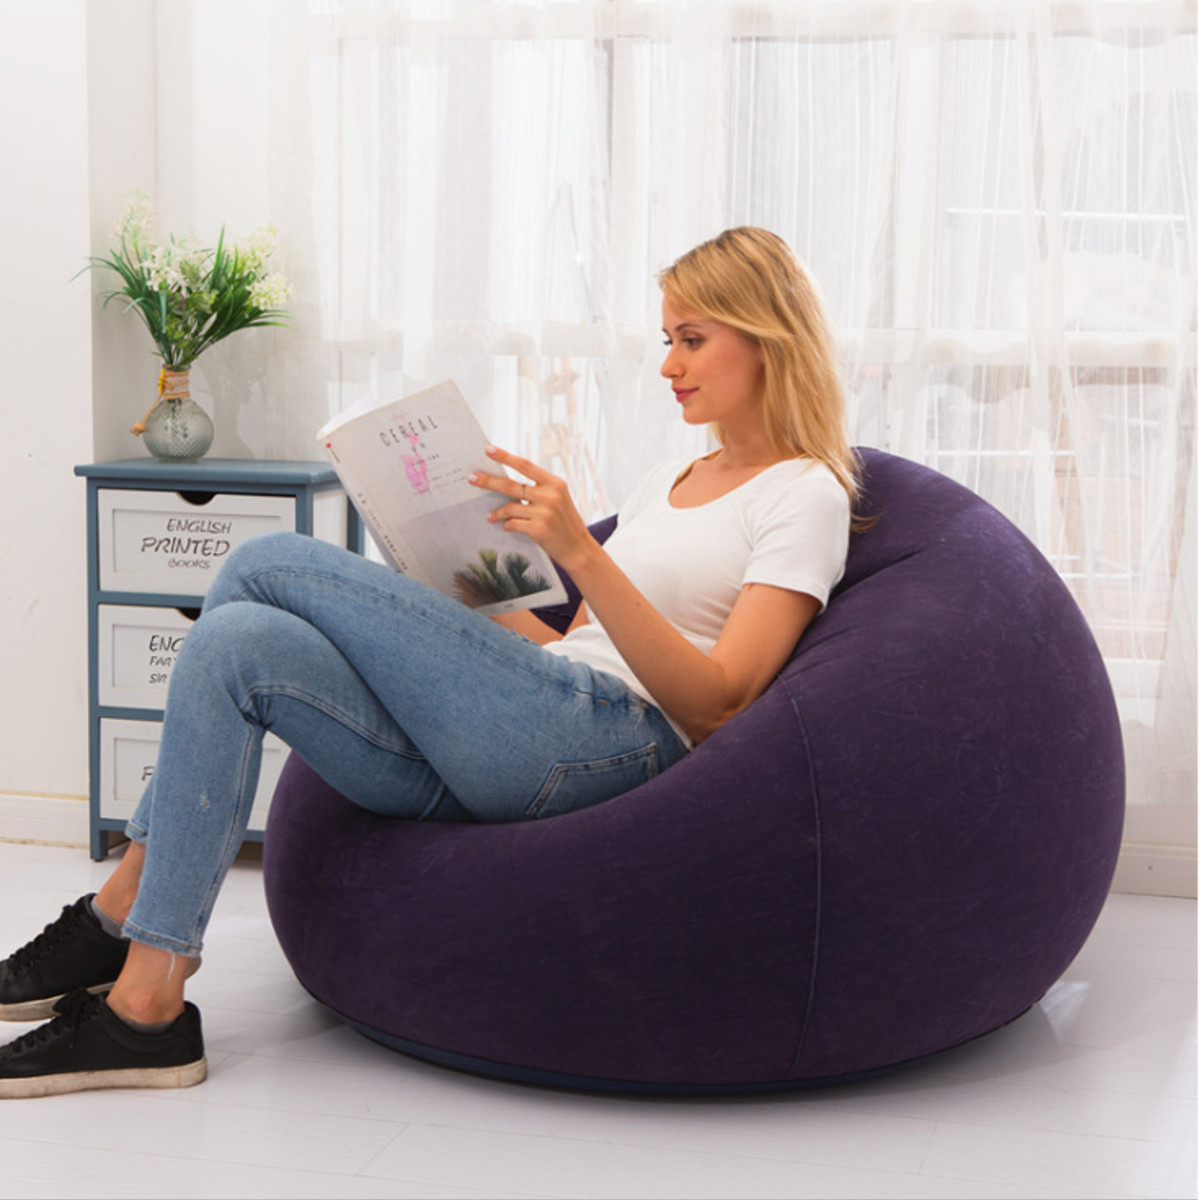 110x85cm-Large-Inflatable-Chair-Bean-Bag-PVC-IndoorOutdoor-Garden-Furniture-Lounge-Adult-Lazy-Sofa-N-1682288-9